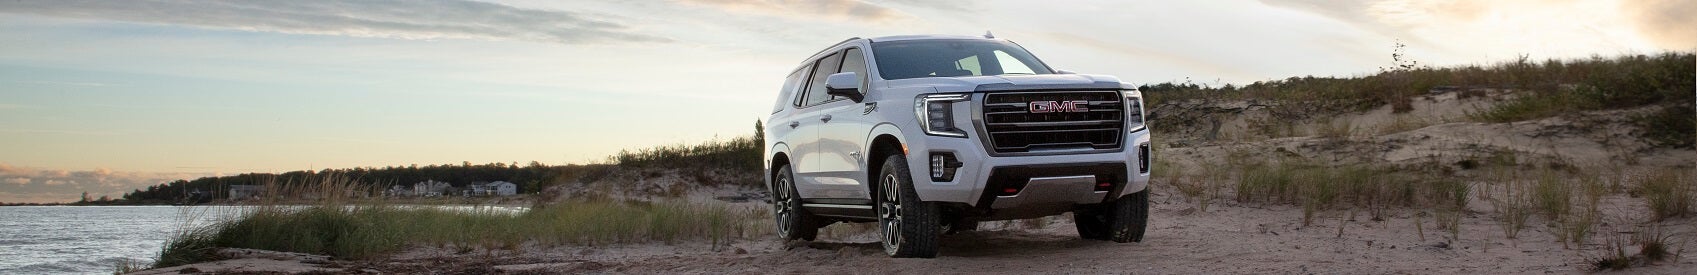 2021 gmc towing guide 